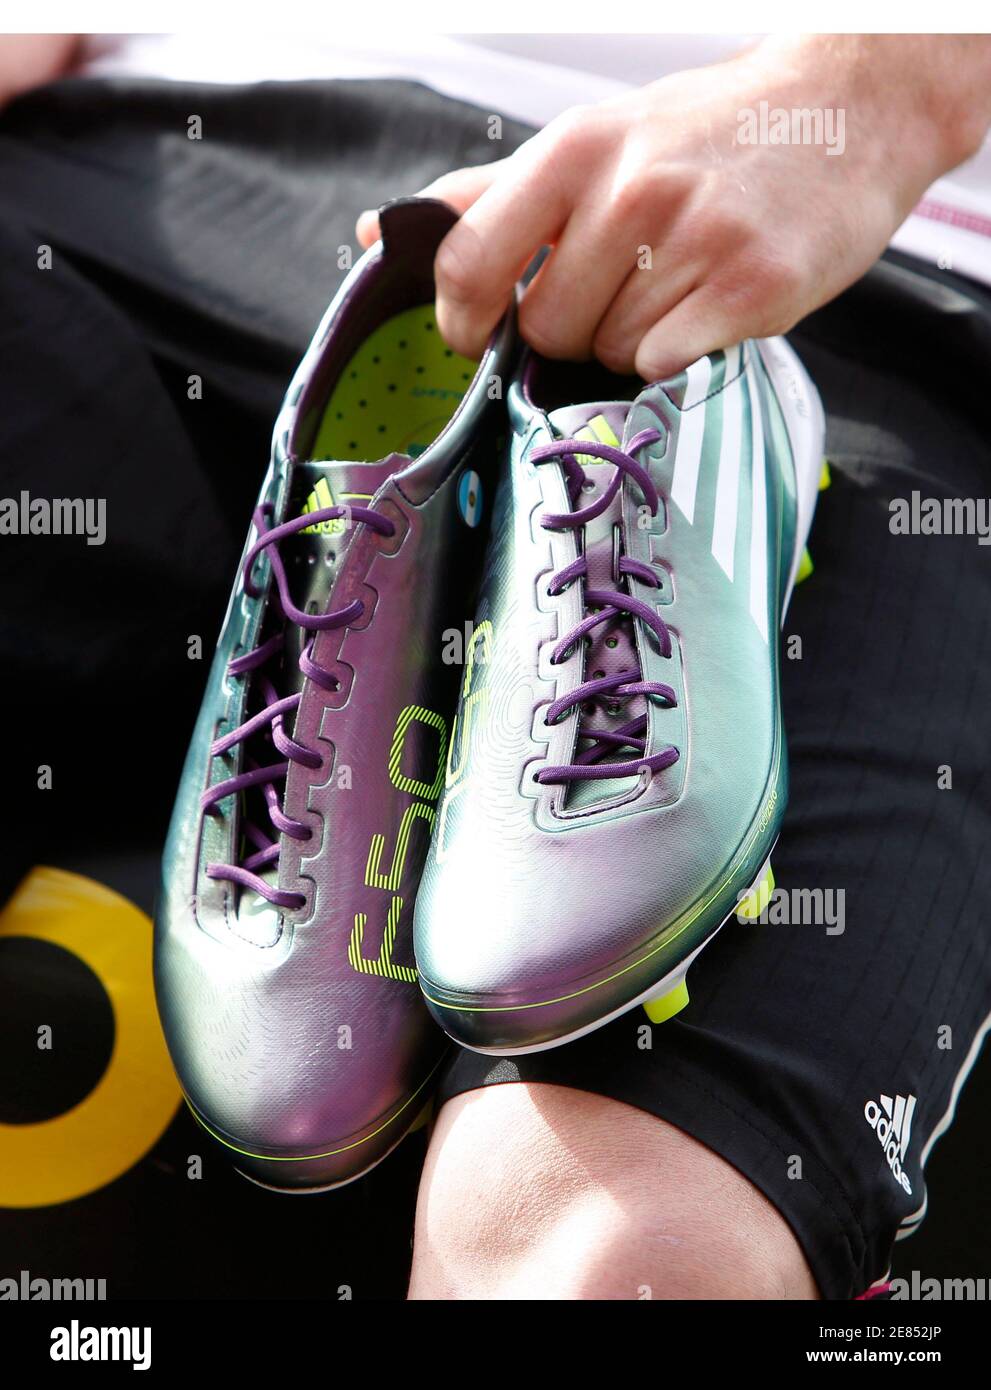 Argentina's national soccer team player Lionel Messi displays the new F50  adiZero soccer boots during a promotional event at Montmelo circuit near  Barcelona May 11, 2010. The boots, weighing only 165 grams,